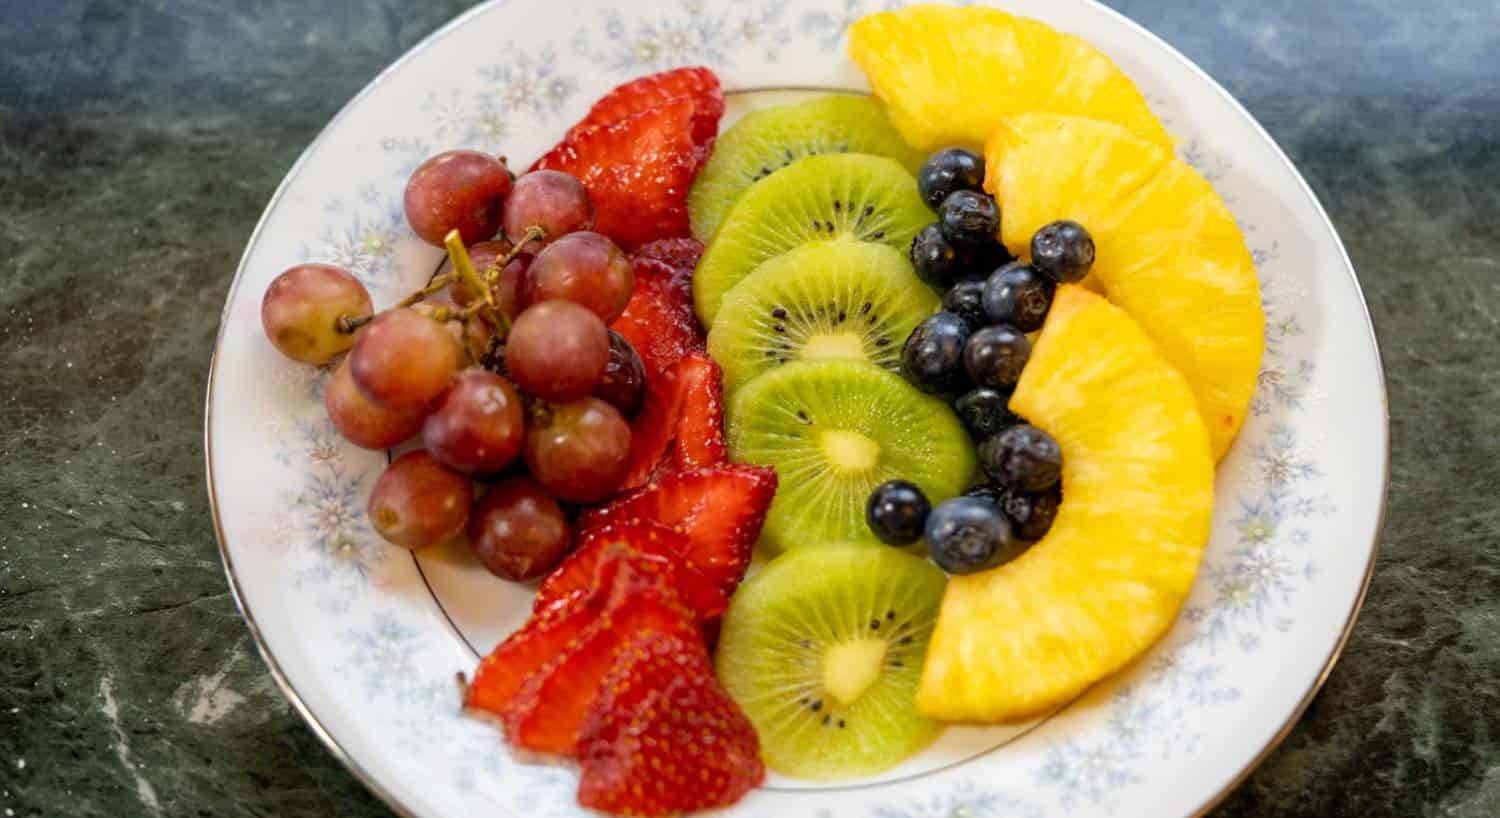 Close up view of sliced strawberries, kiwi, and pineapple, grapes and blueberries